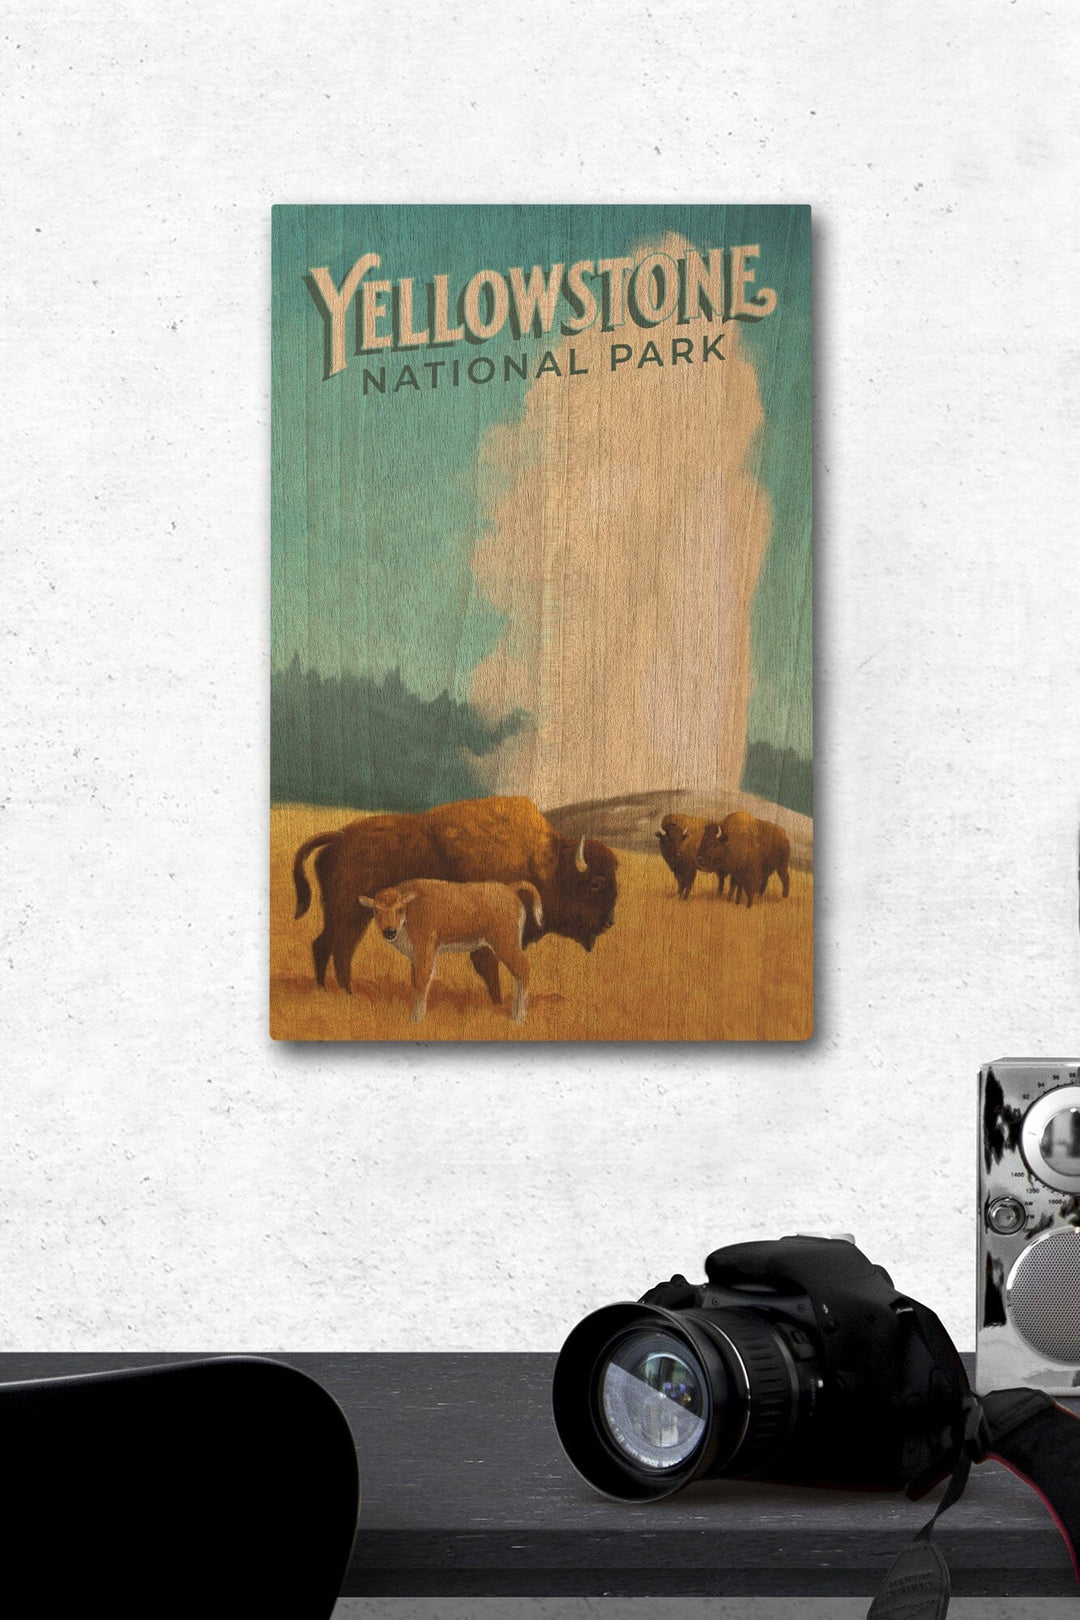 Yellowstone National Park, Old Faithful and Bison, Oil Painting, Lantern Press Artwork, Wood Signs and Postcards Wood Lantern Press 12 x 18 Wood Gallery Print 